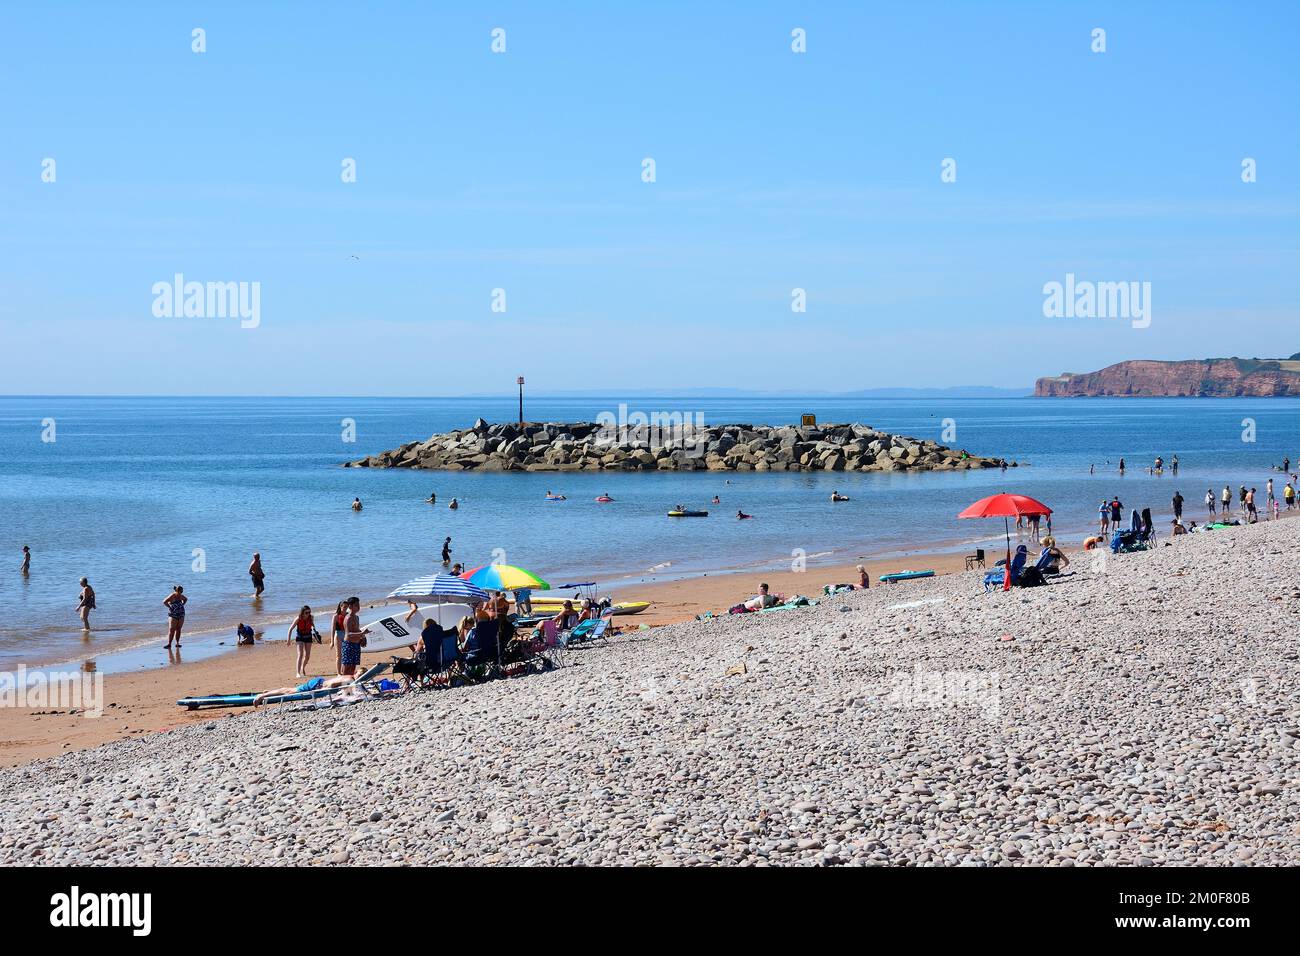 Tourists relaxing on the beach with views towards the cliffs, Sidmouth, Devon, UK, Europe. Stock Photo